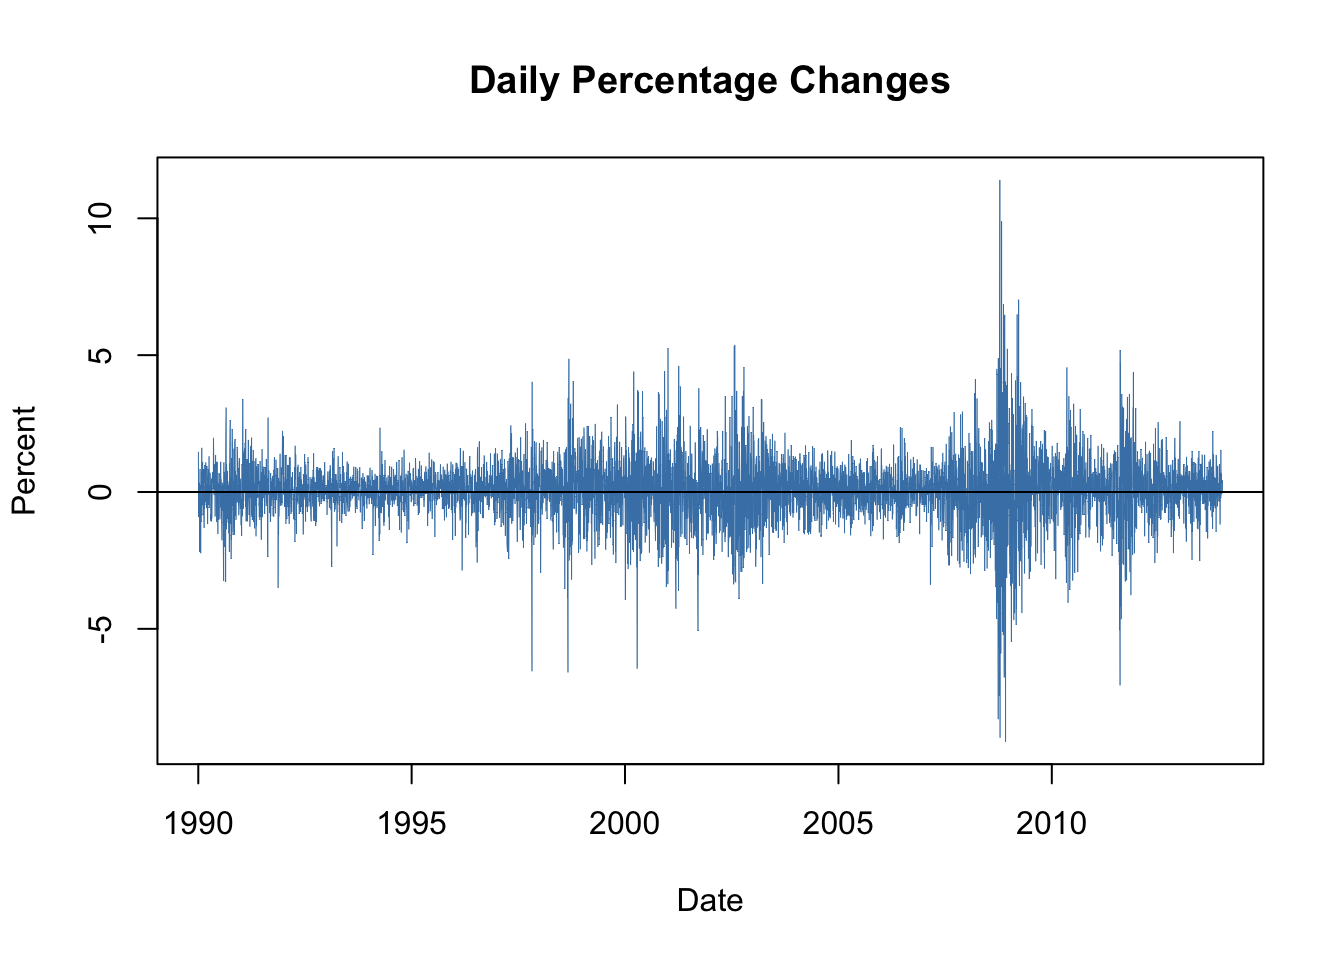 Daily Percentage Returns in the Wilshire 5000 Indrx